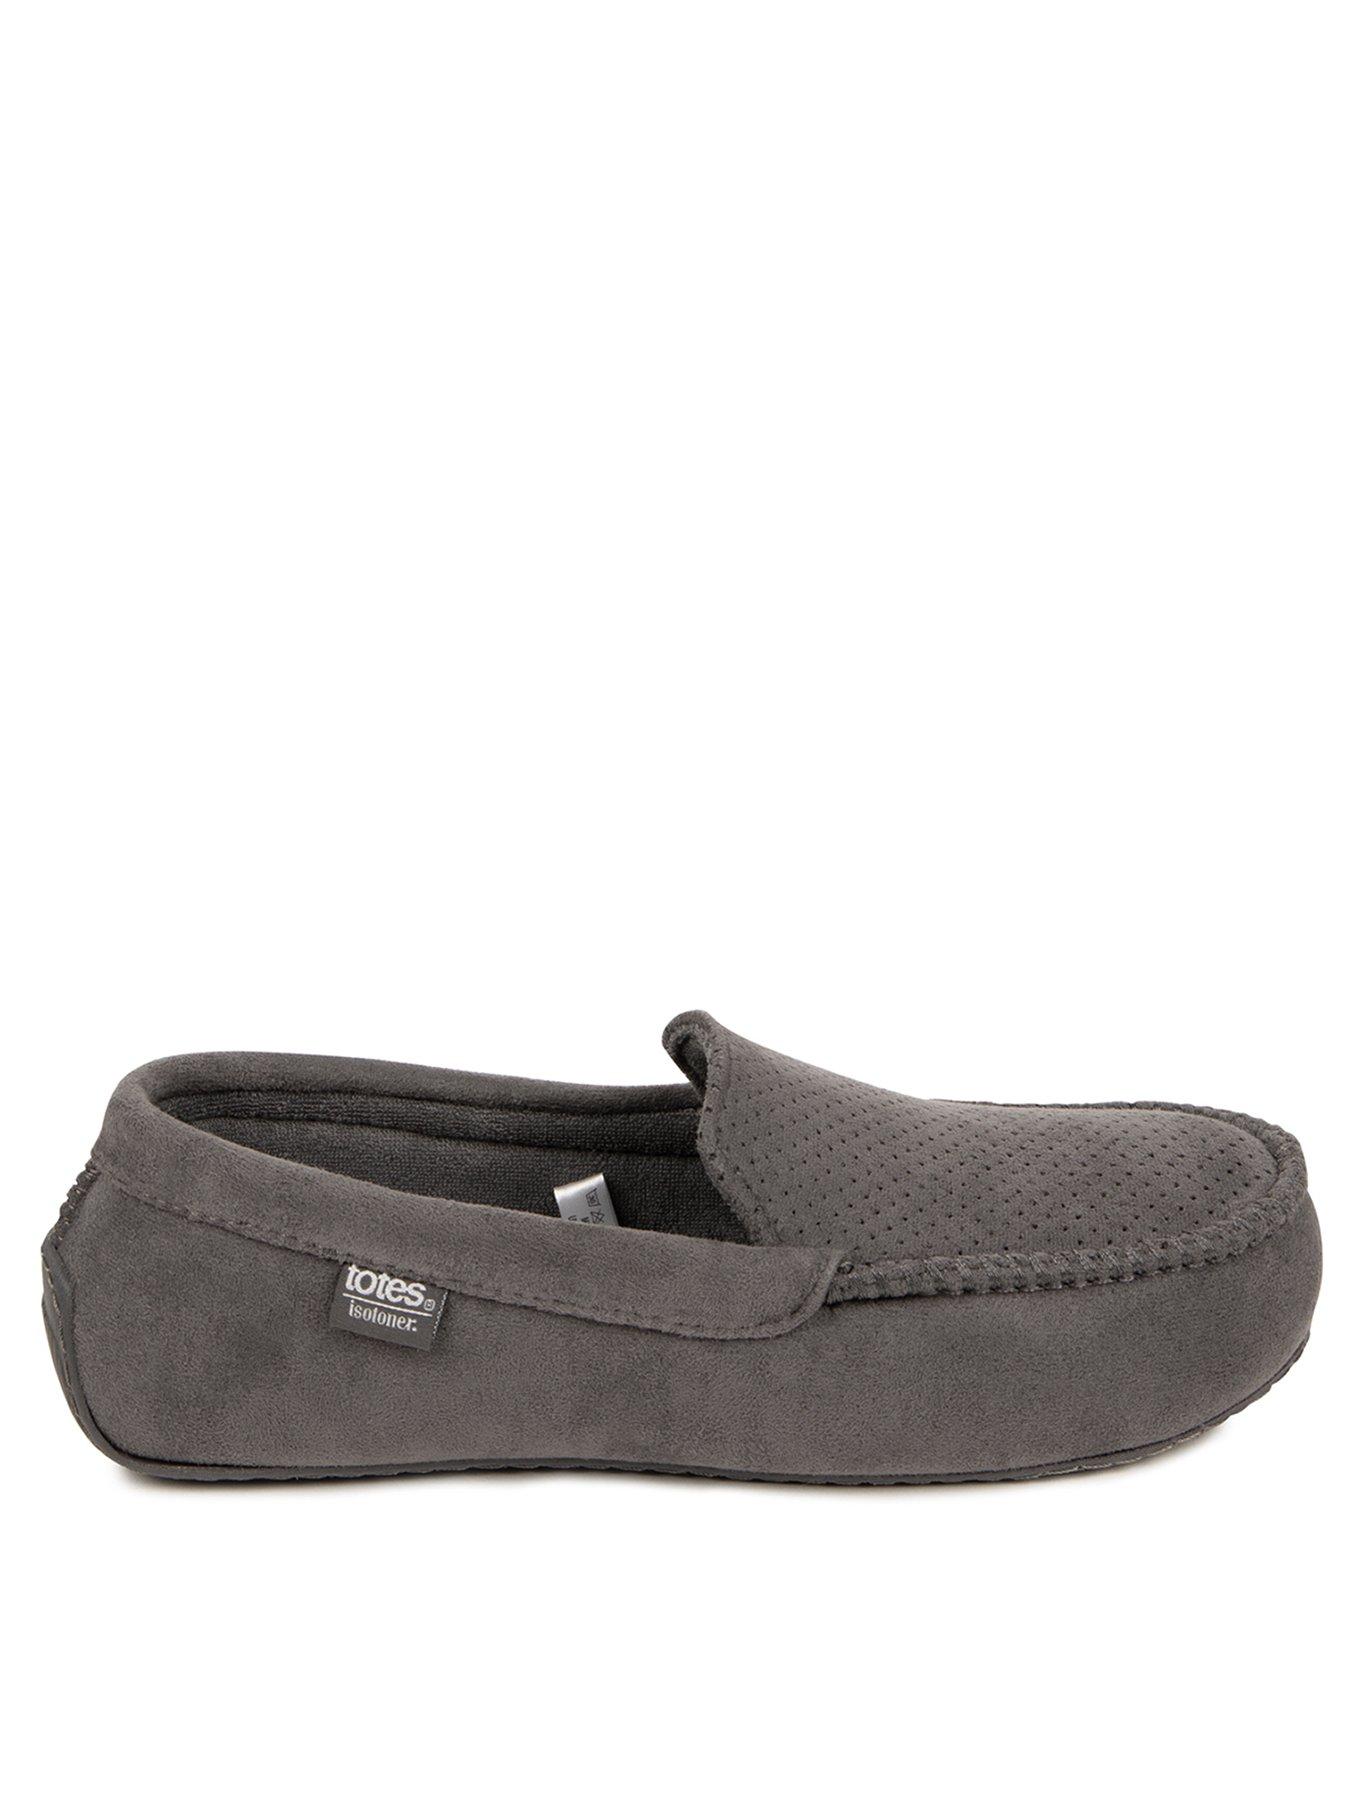 Nightwear & Loungewear Totes Airtex Suedette Moccasin With Memory Foam & Pillowstep Slipper